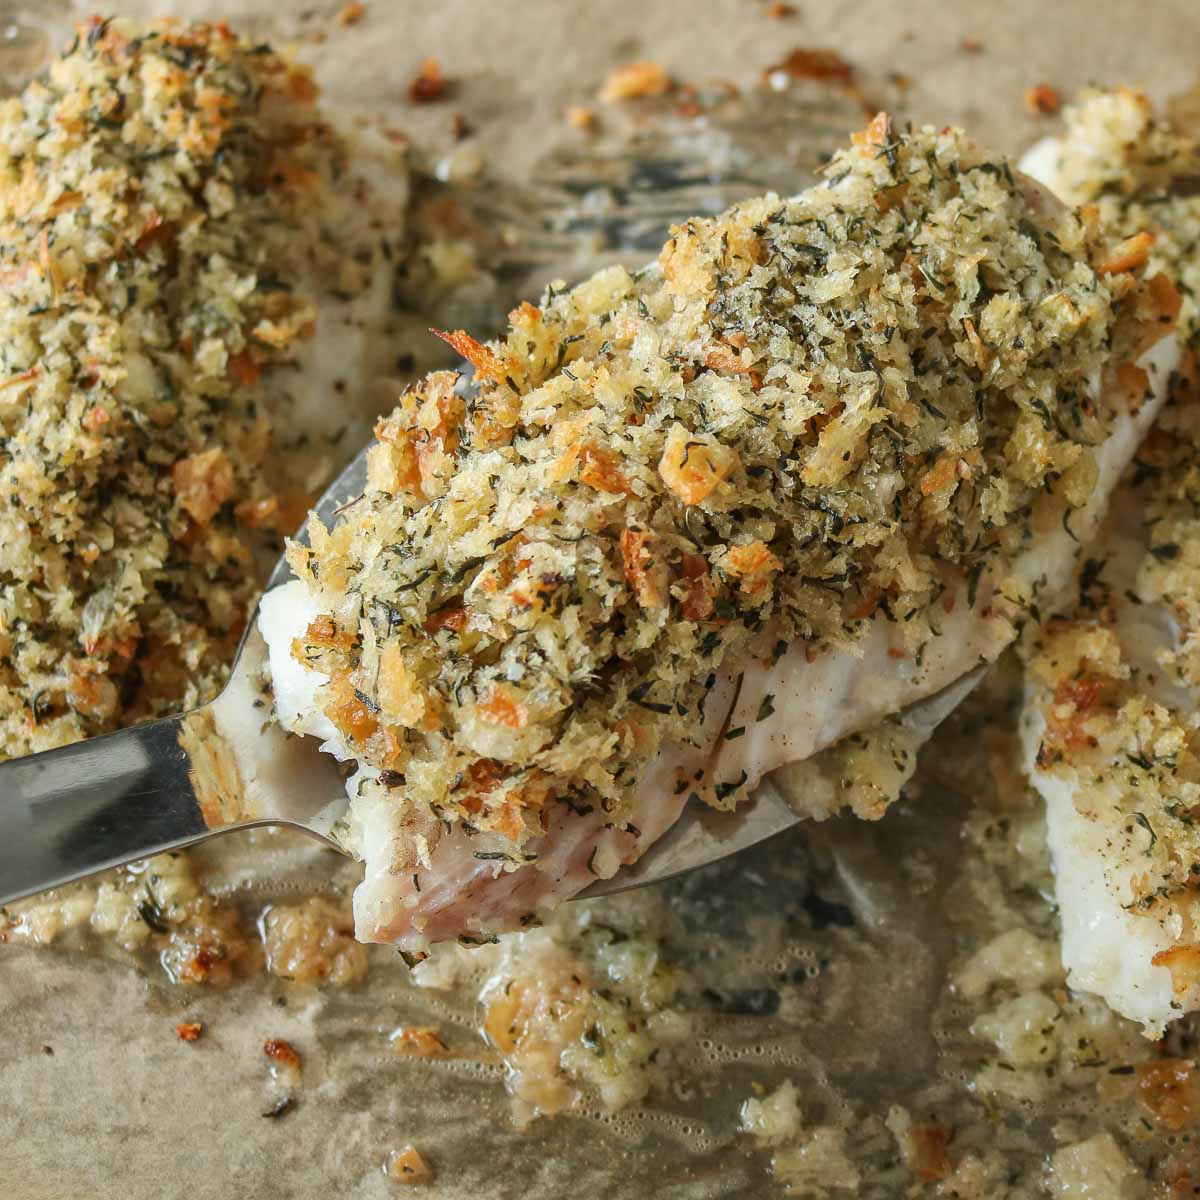 Spatula picking up a baked cod fillet with dressing from a parchment paper-lined sheet pan.